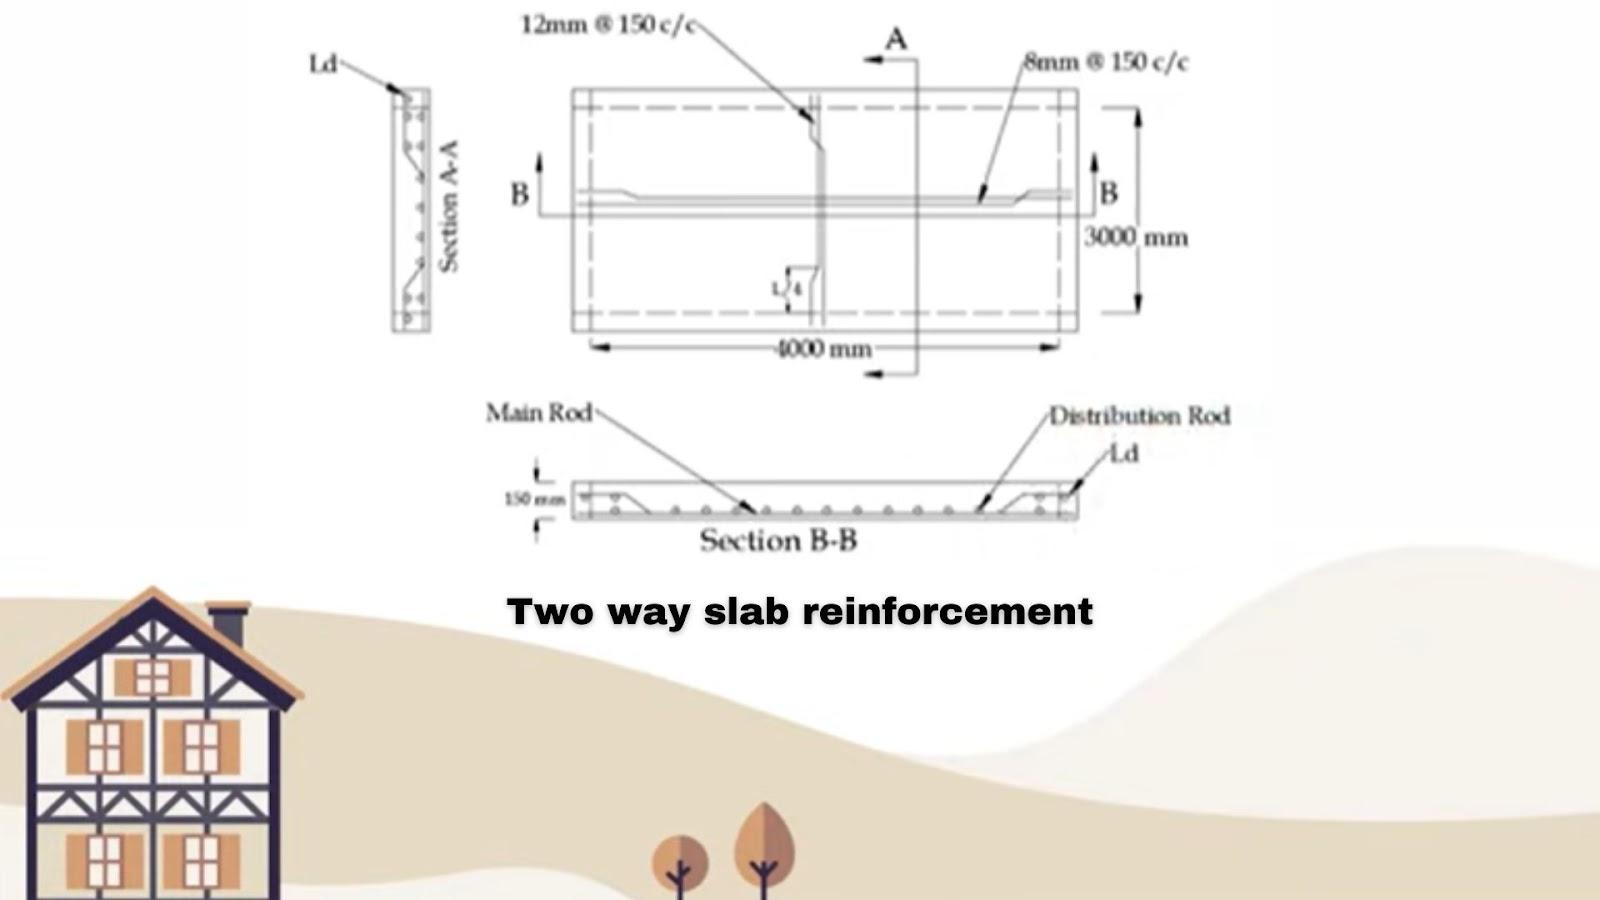 What are the Two Way Slab reinforcement details?